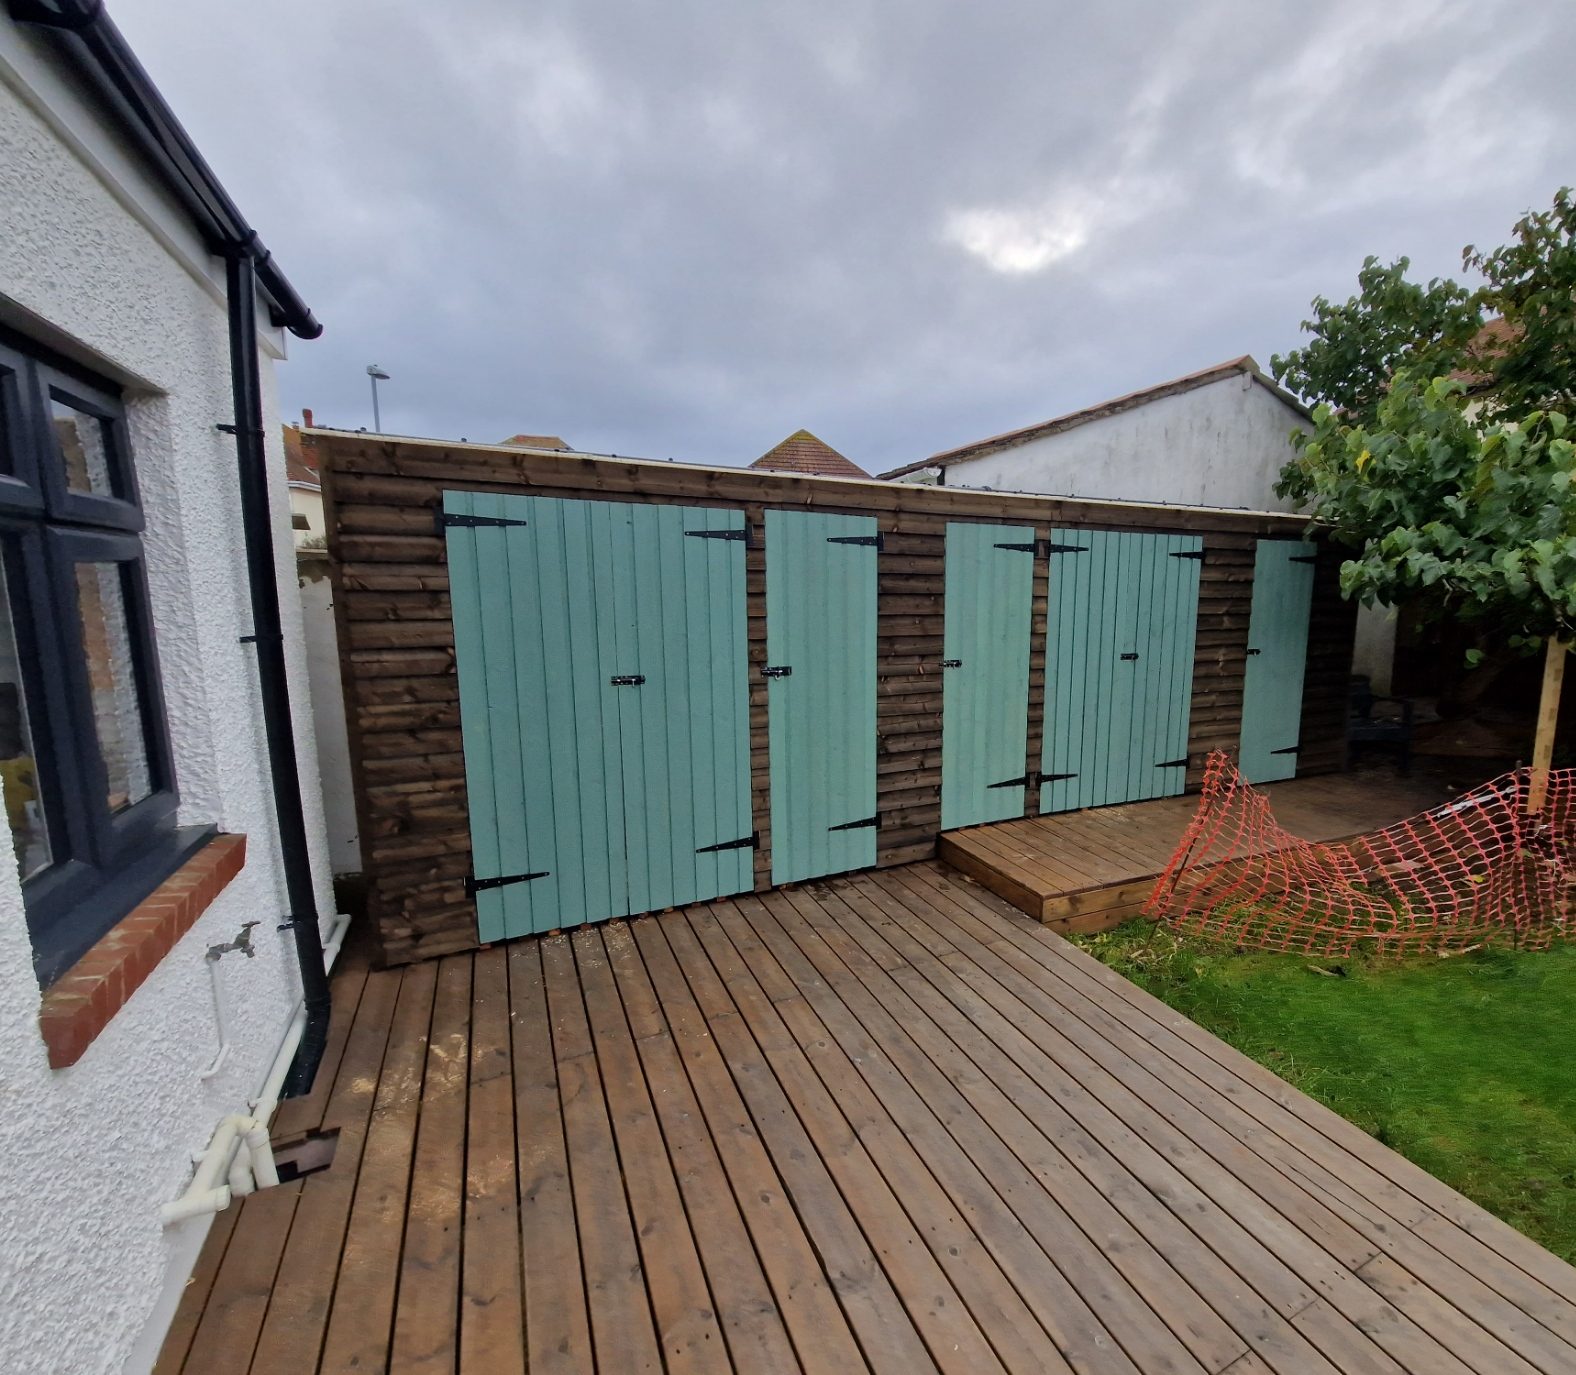 Dorset: shed company, flatpack furniture, shelves, decking, cleaning, upcycle